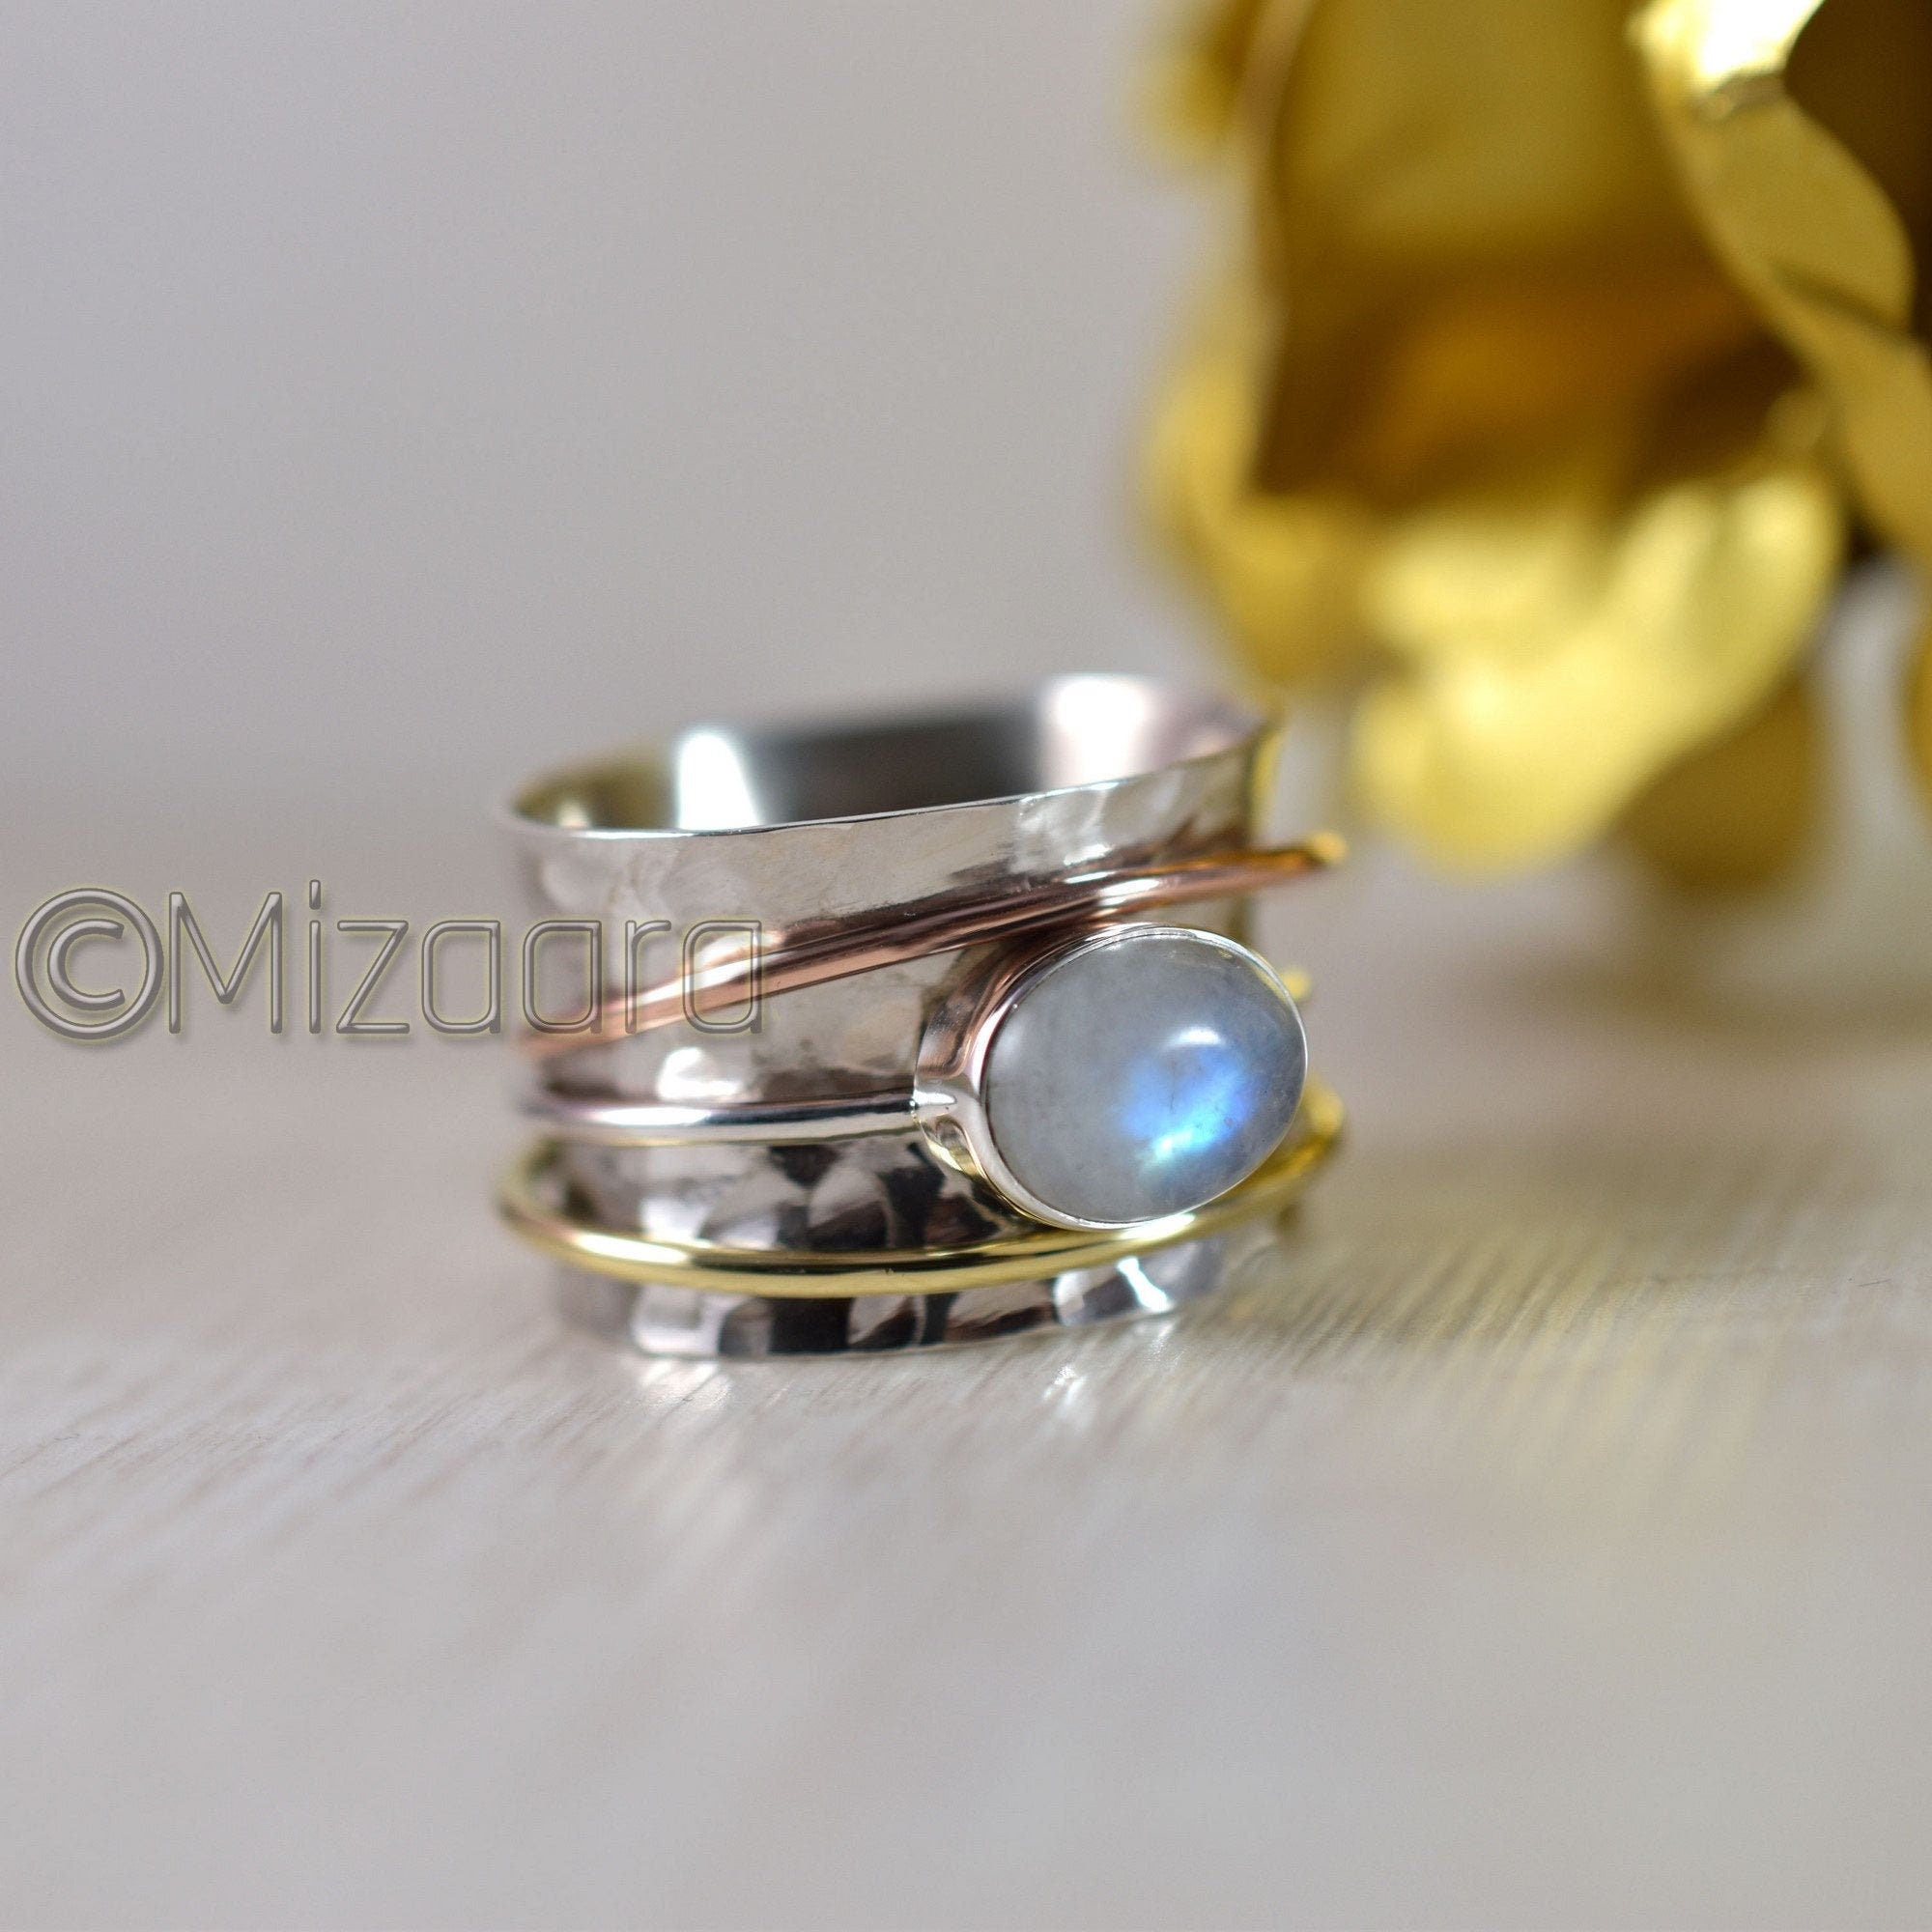 Moonstone Spinner Ring Sterling Silver Meditation Hammered Three Tone Yoga Healing Anxiety Birthstone Jewelry Gift